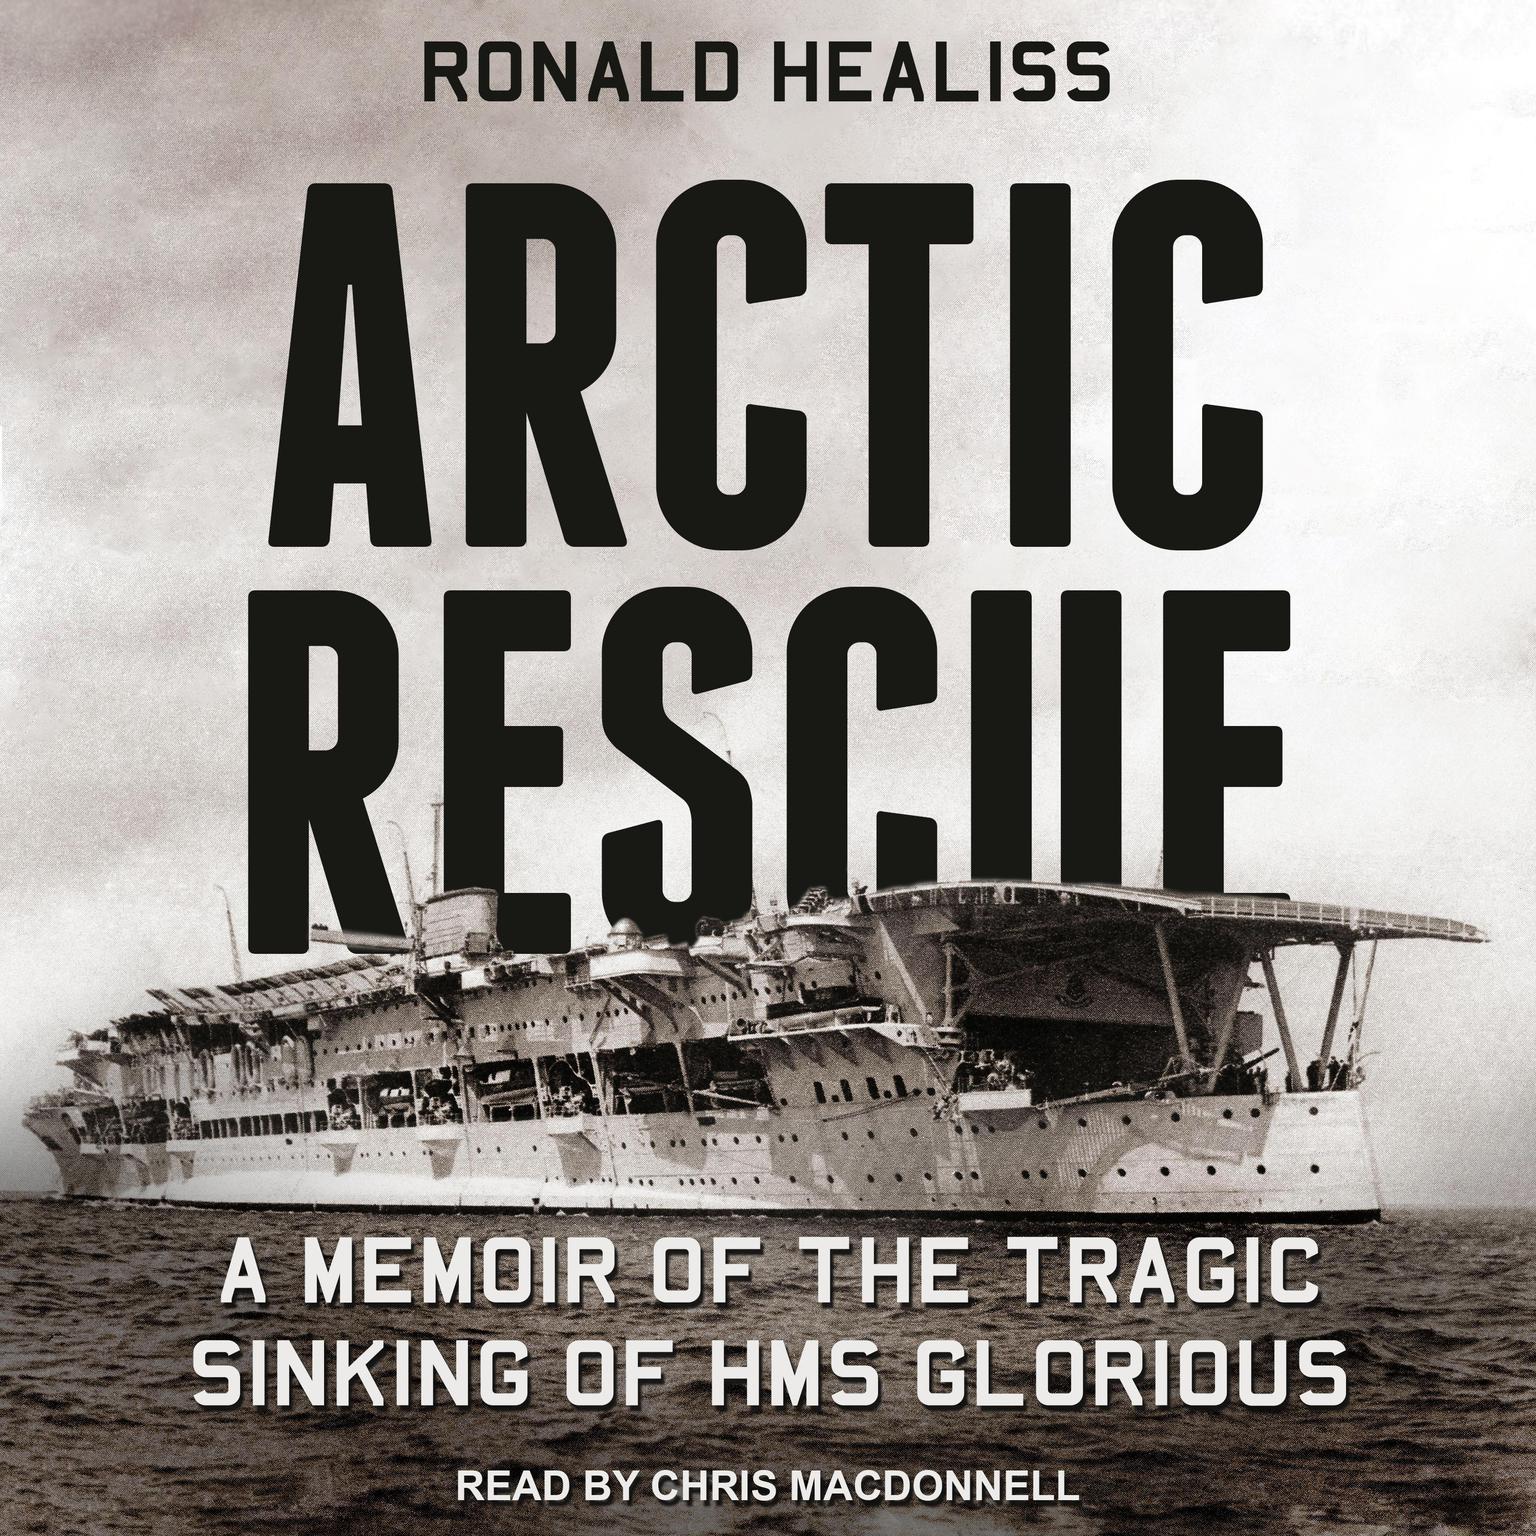 Arctic Rescue: A Memoir of the Tragic Sinking of HMS Glorious Audiobook, by Ronald Healiss